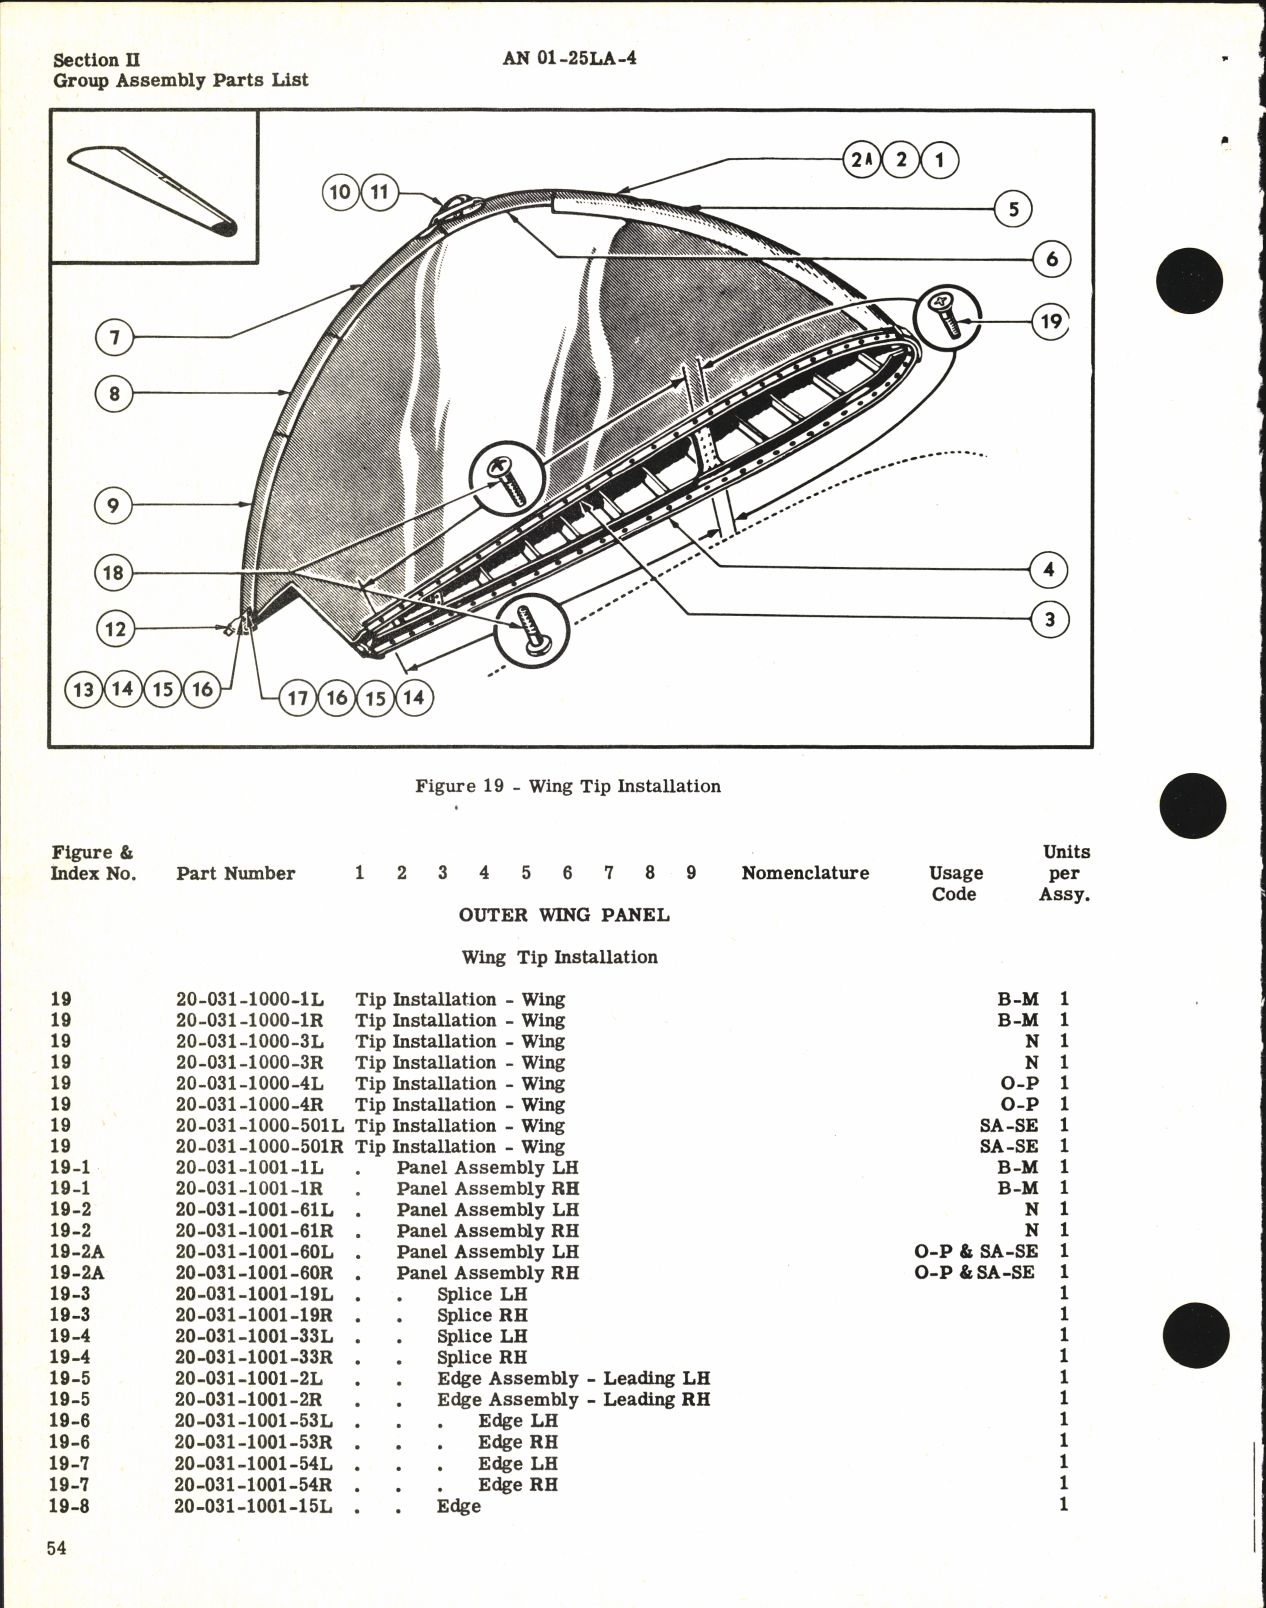 Sample page 8 from AirCorps Library document: Parts Catalog for C-46A, C-46D, and R5C-1